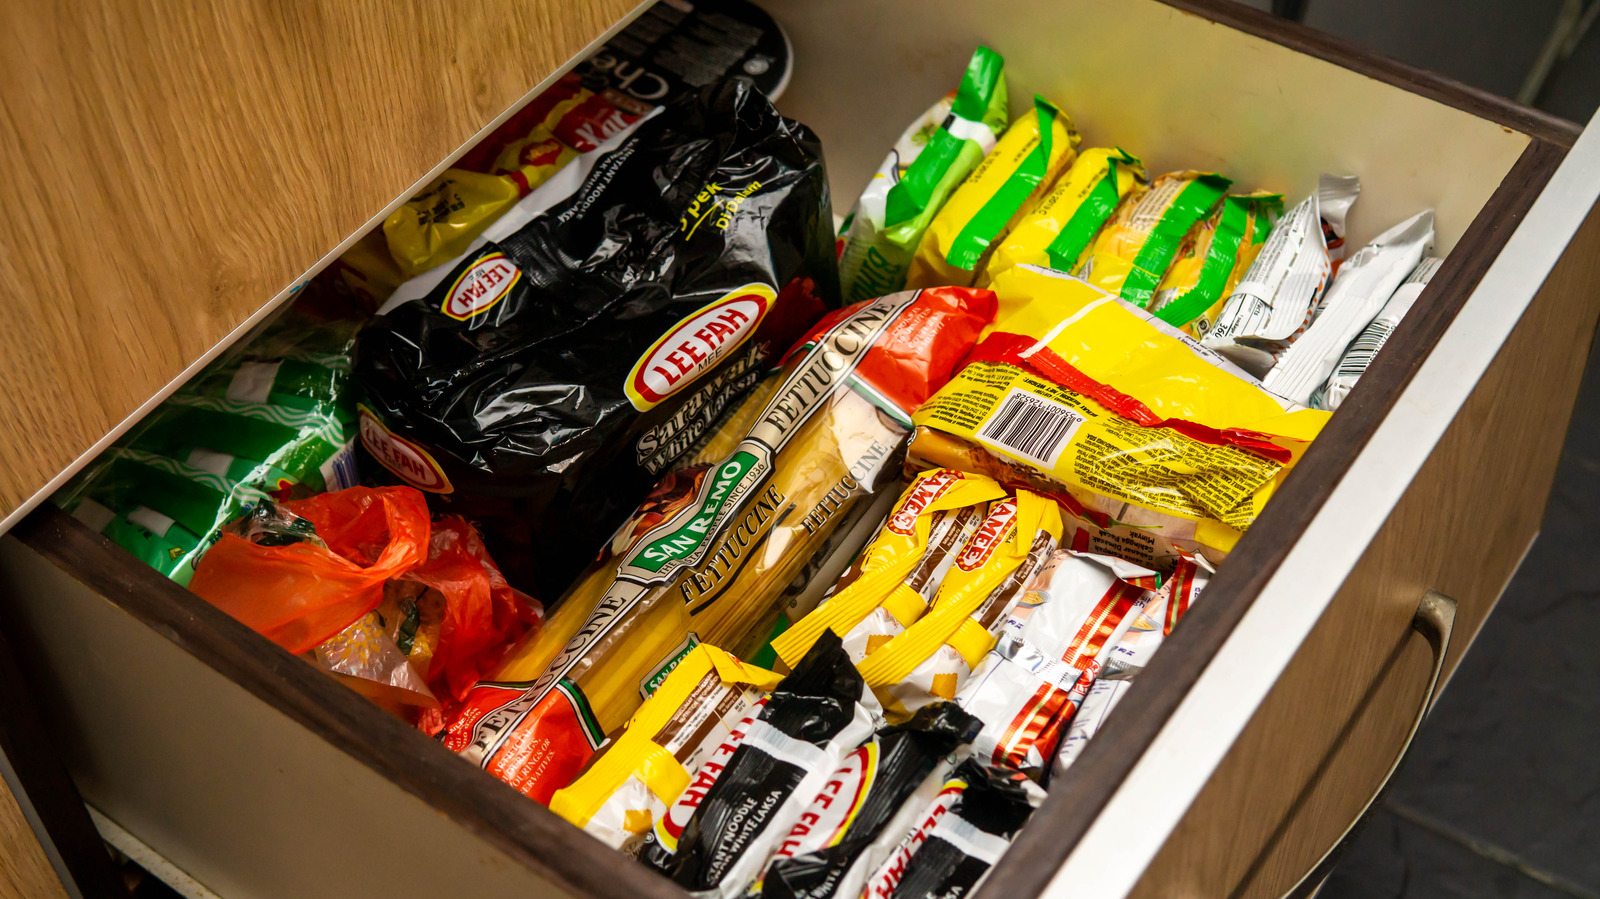 https://www.housedigest.com/img/gallery/save-kitchen-drawer-space-with-this-vertical-snack-organization-tip/l-intro-1685108361.jpg